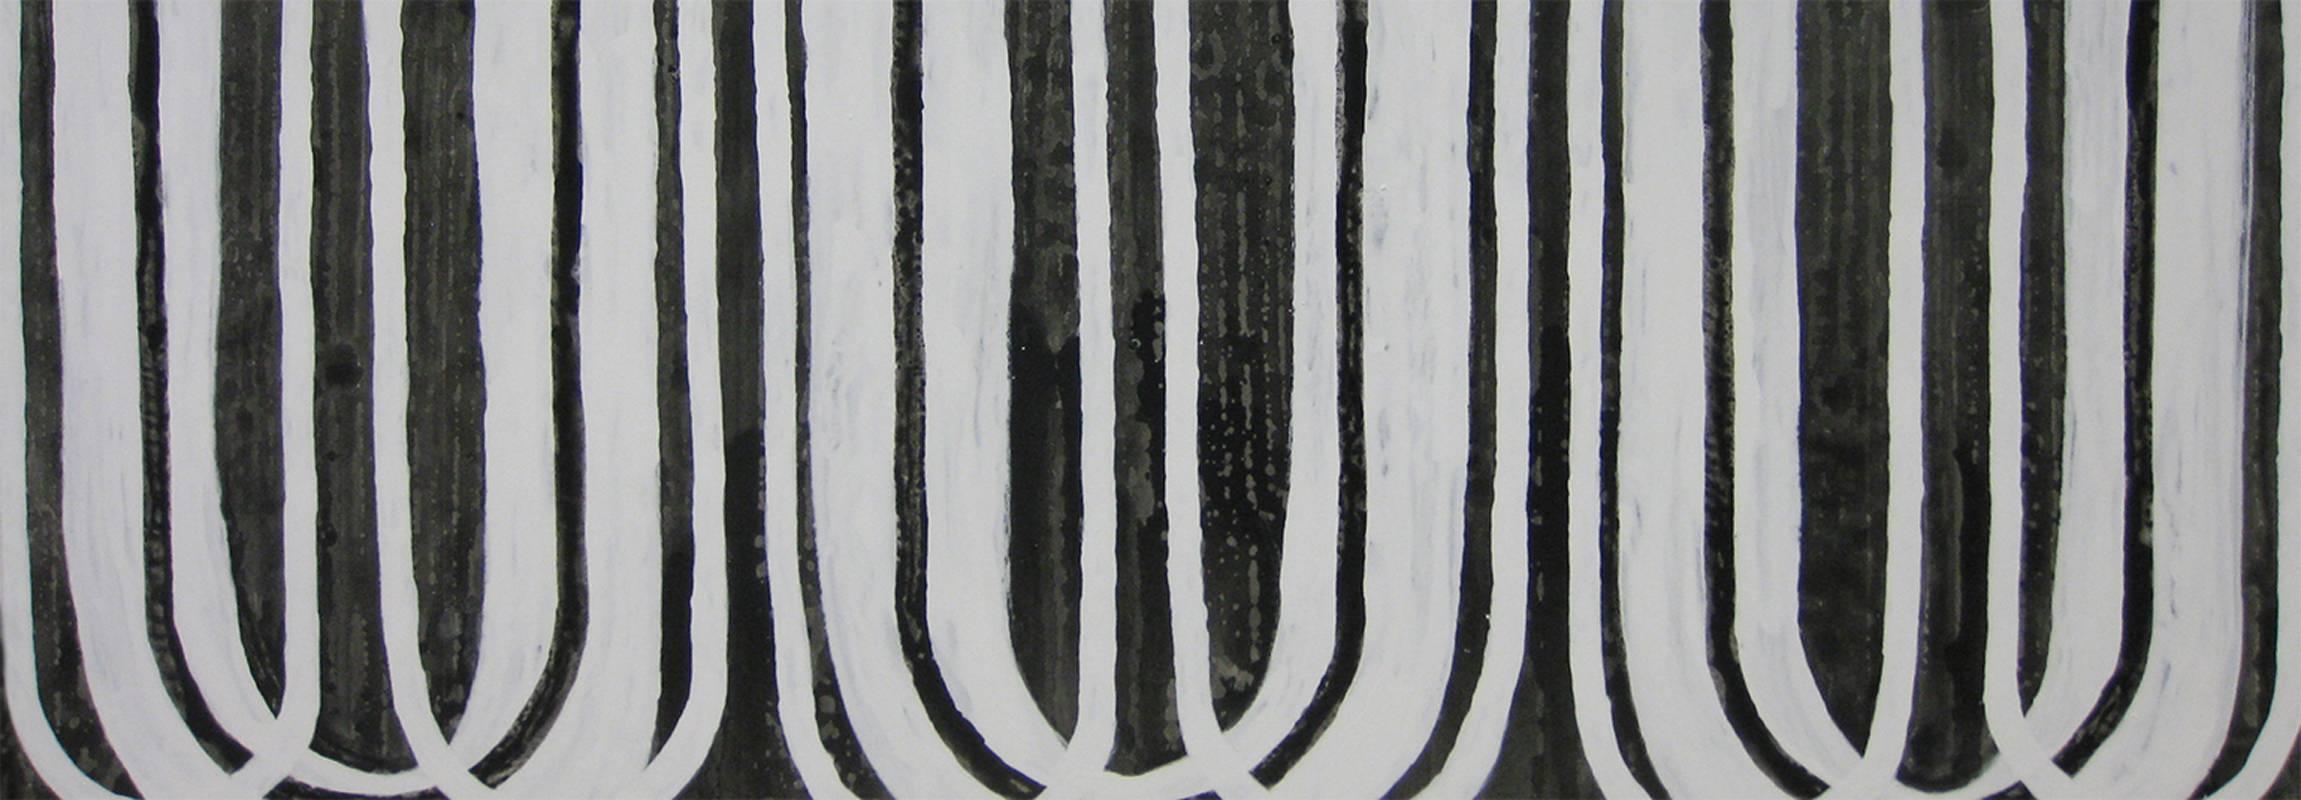 'Day by Day', Black and White Abstract minimalist Japanese painting - Painting by Kiyoshi Otsuka